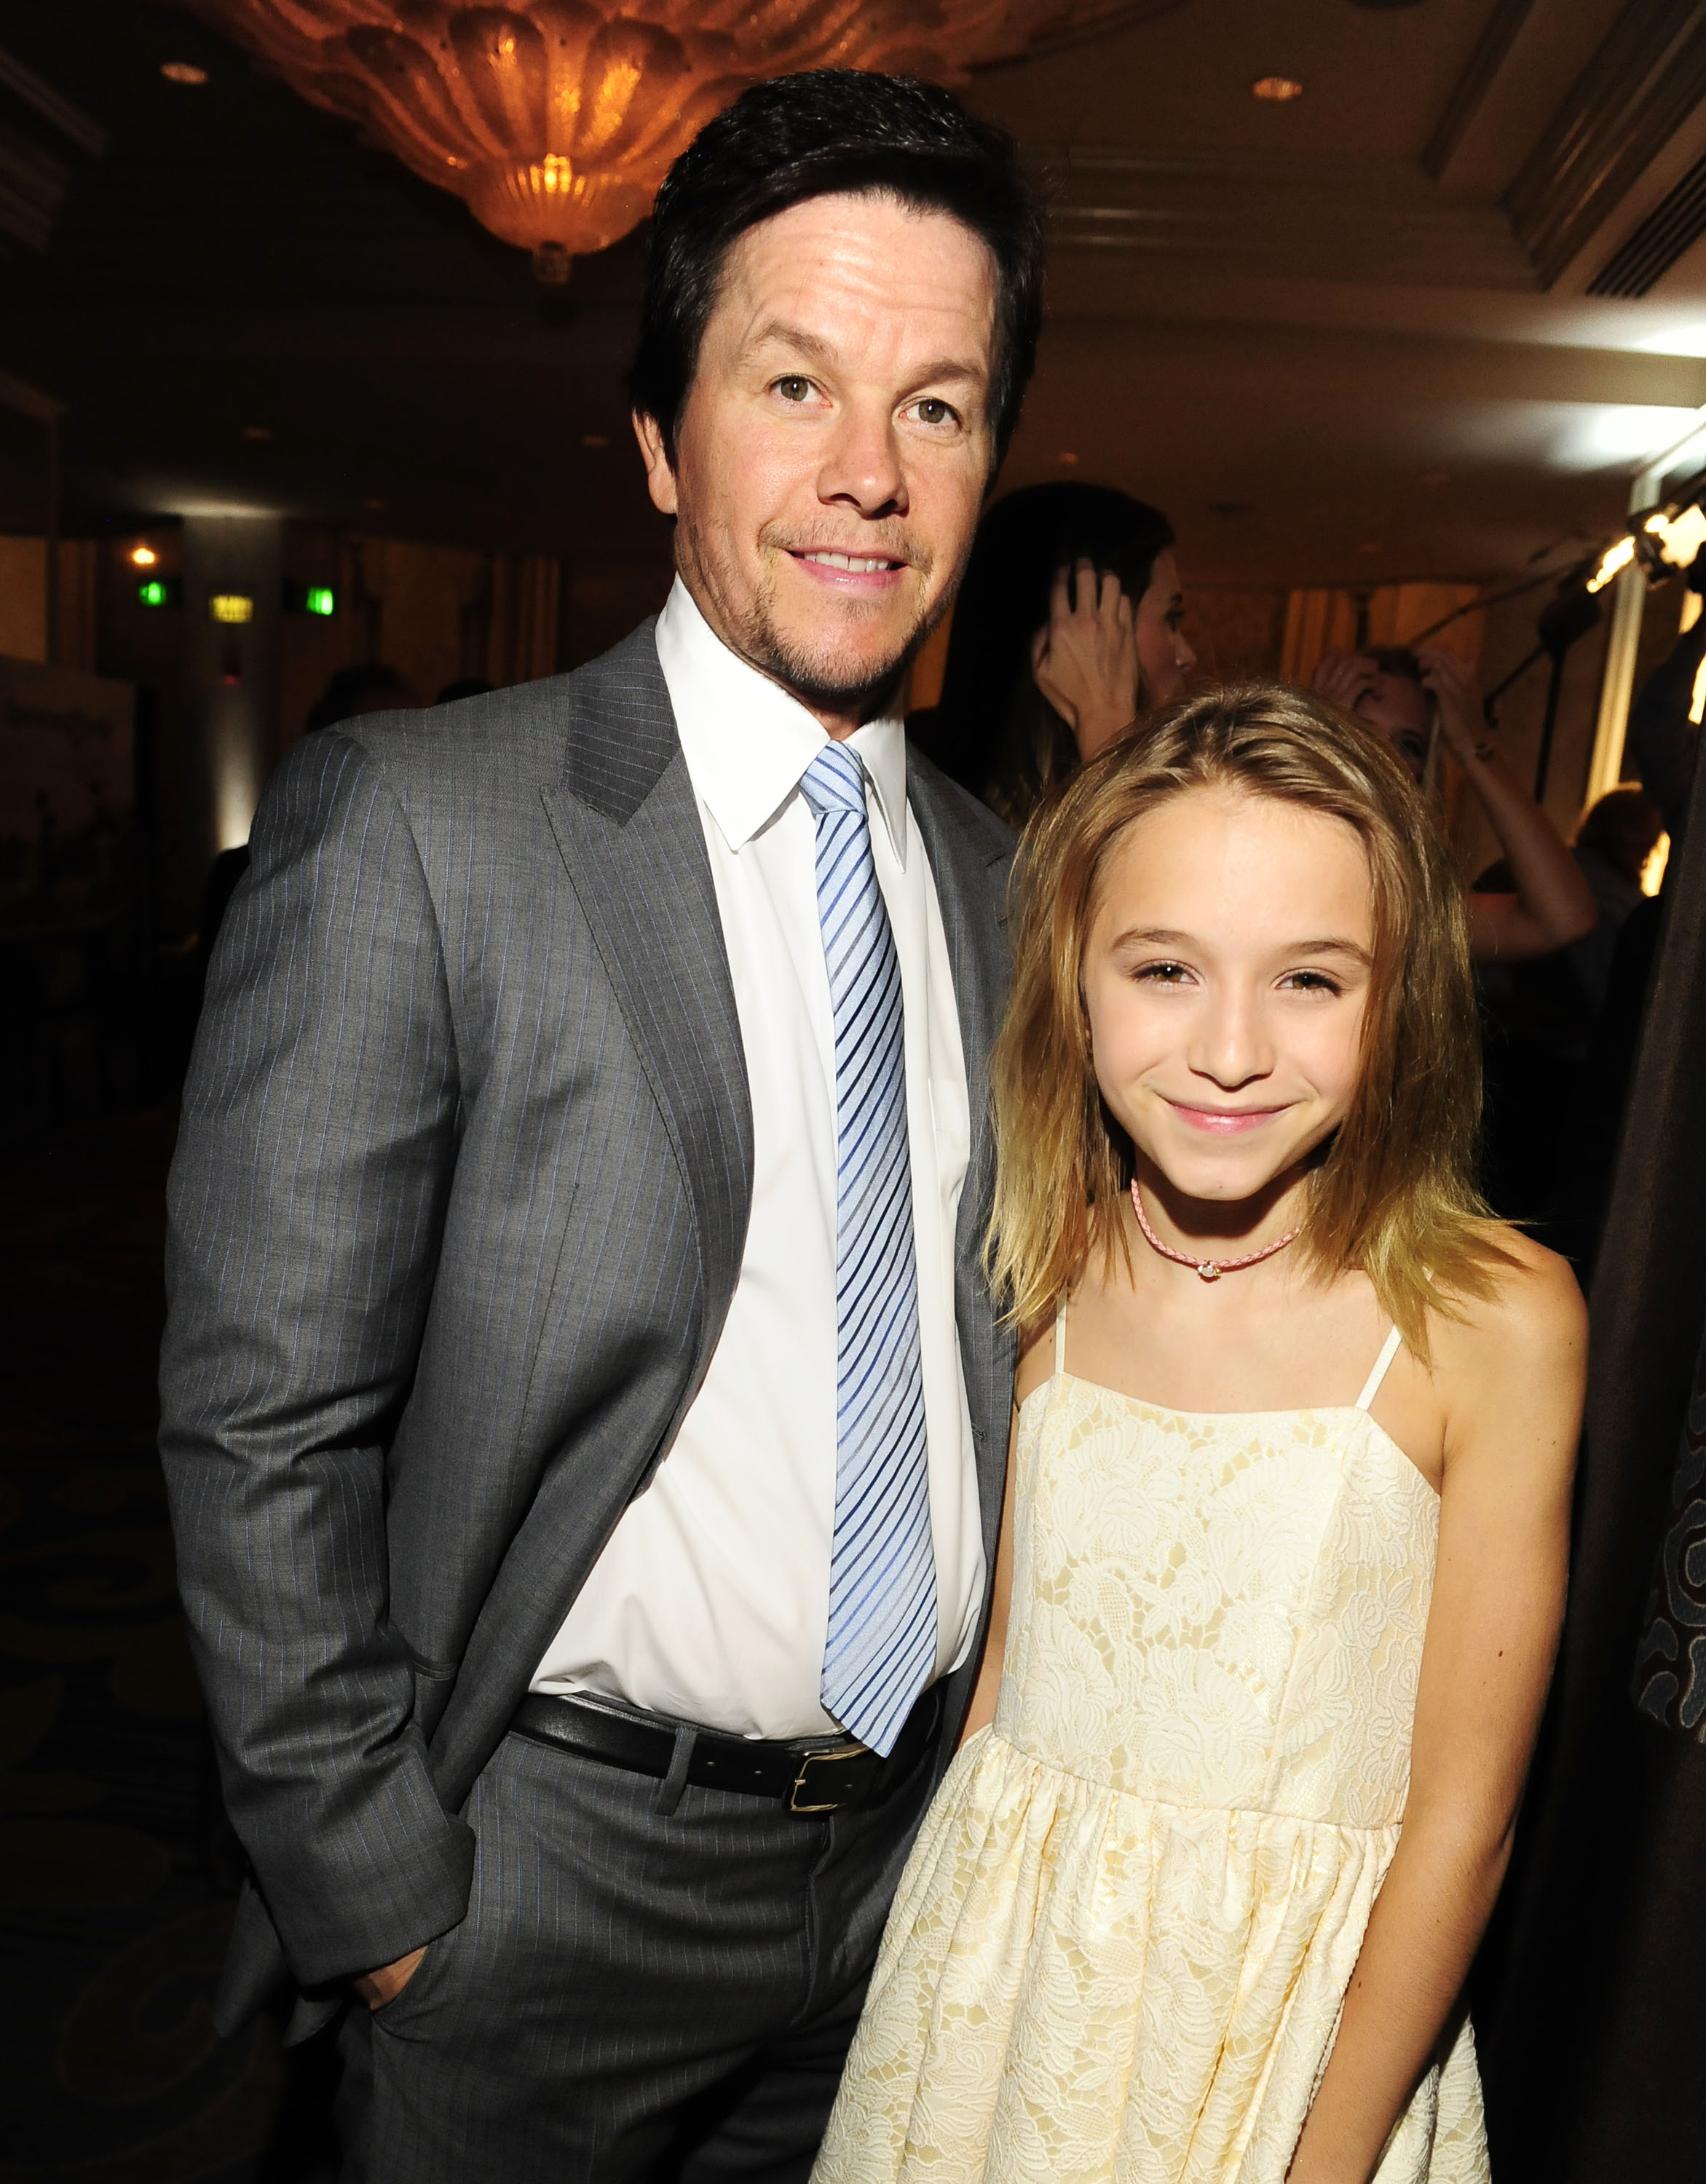 Mark Wahlberg and Ella Wahlberg attend the Operation Smile's 2015 Smile Gala in Beverly Hills, California on October 2, 2015 | Source: Getty Images